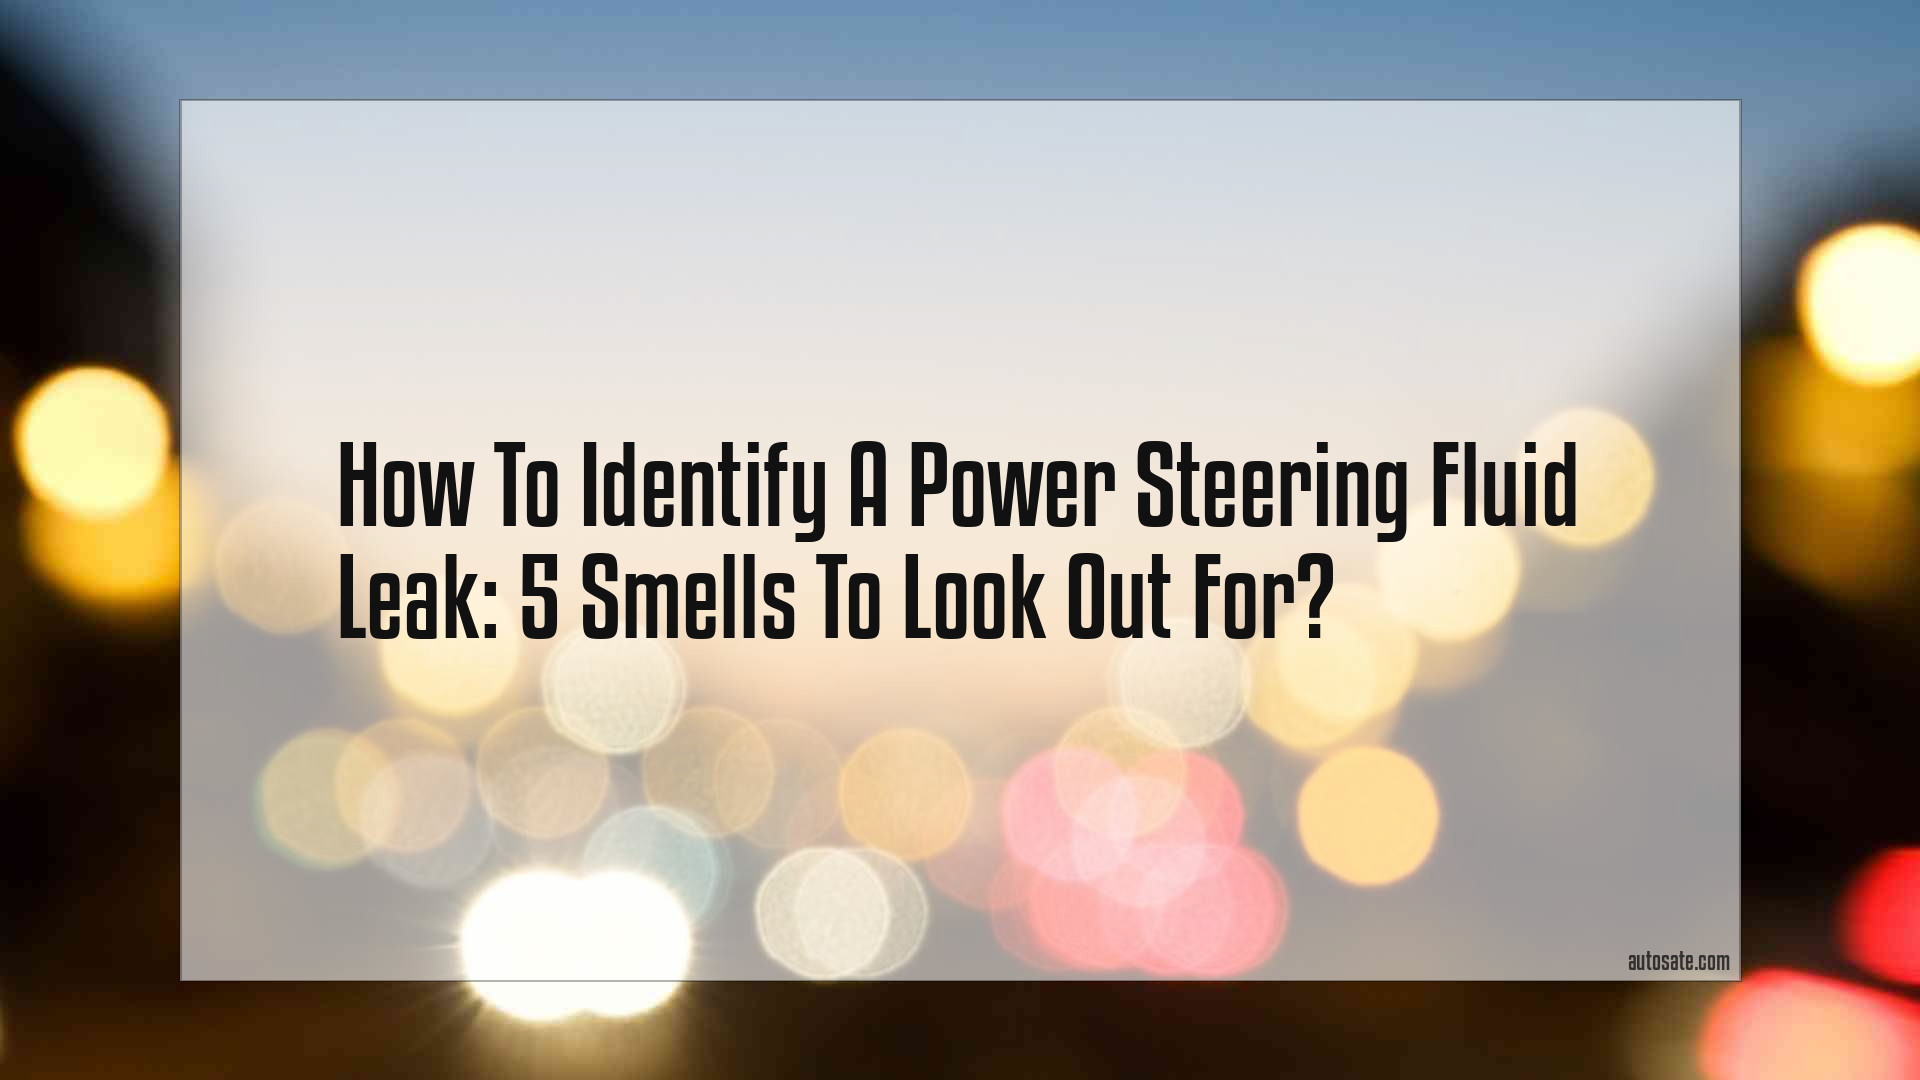 How To Identify A Power Steering Fluid Leak: 5 Smells To Look Out For